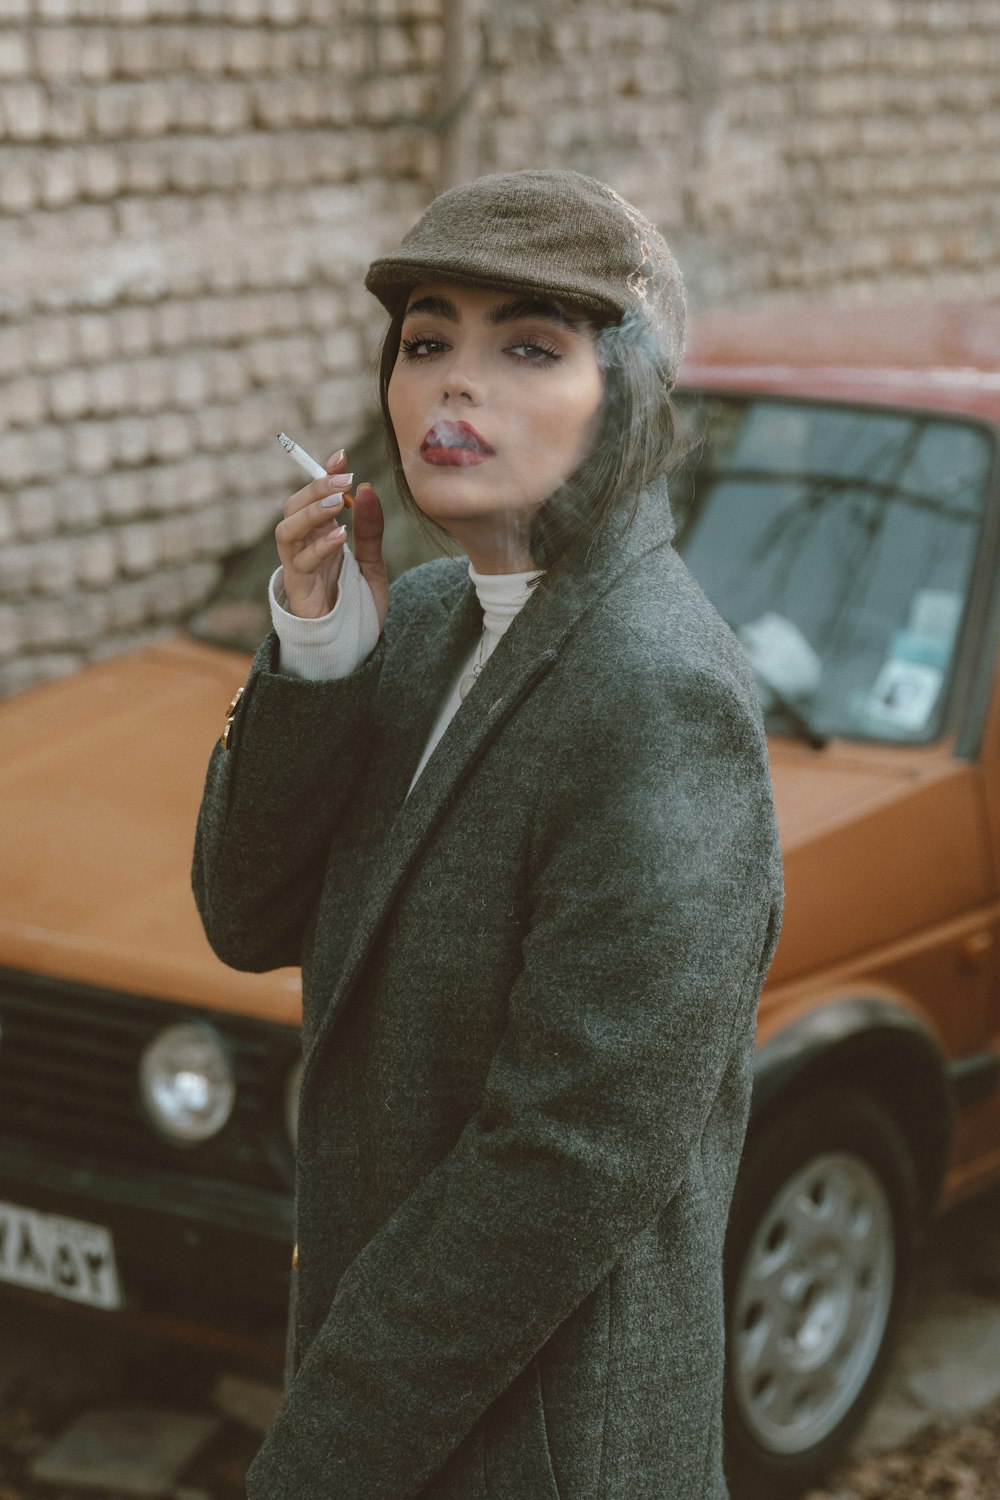 a woman smoking a cigarette in front of a car